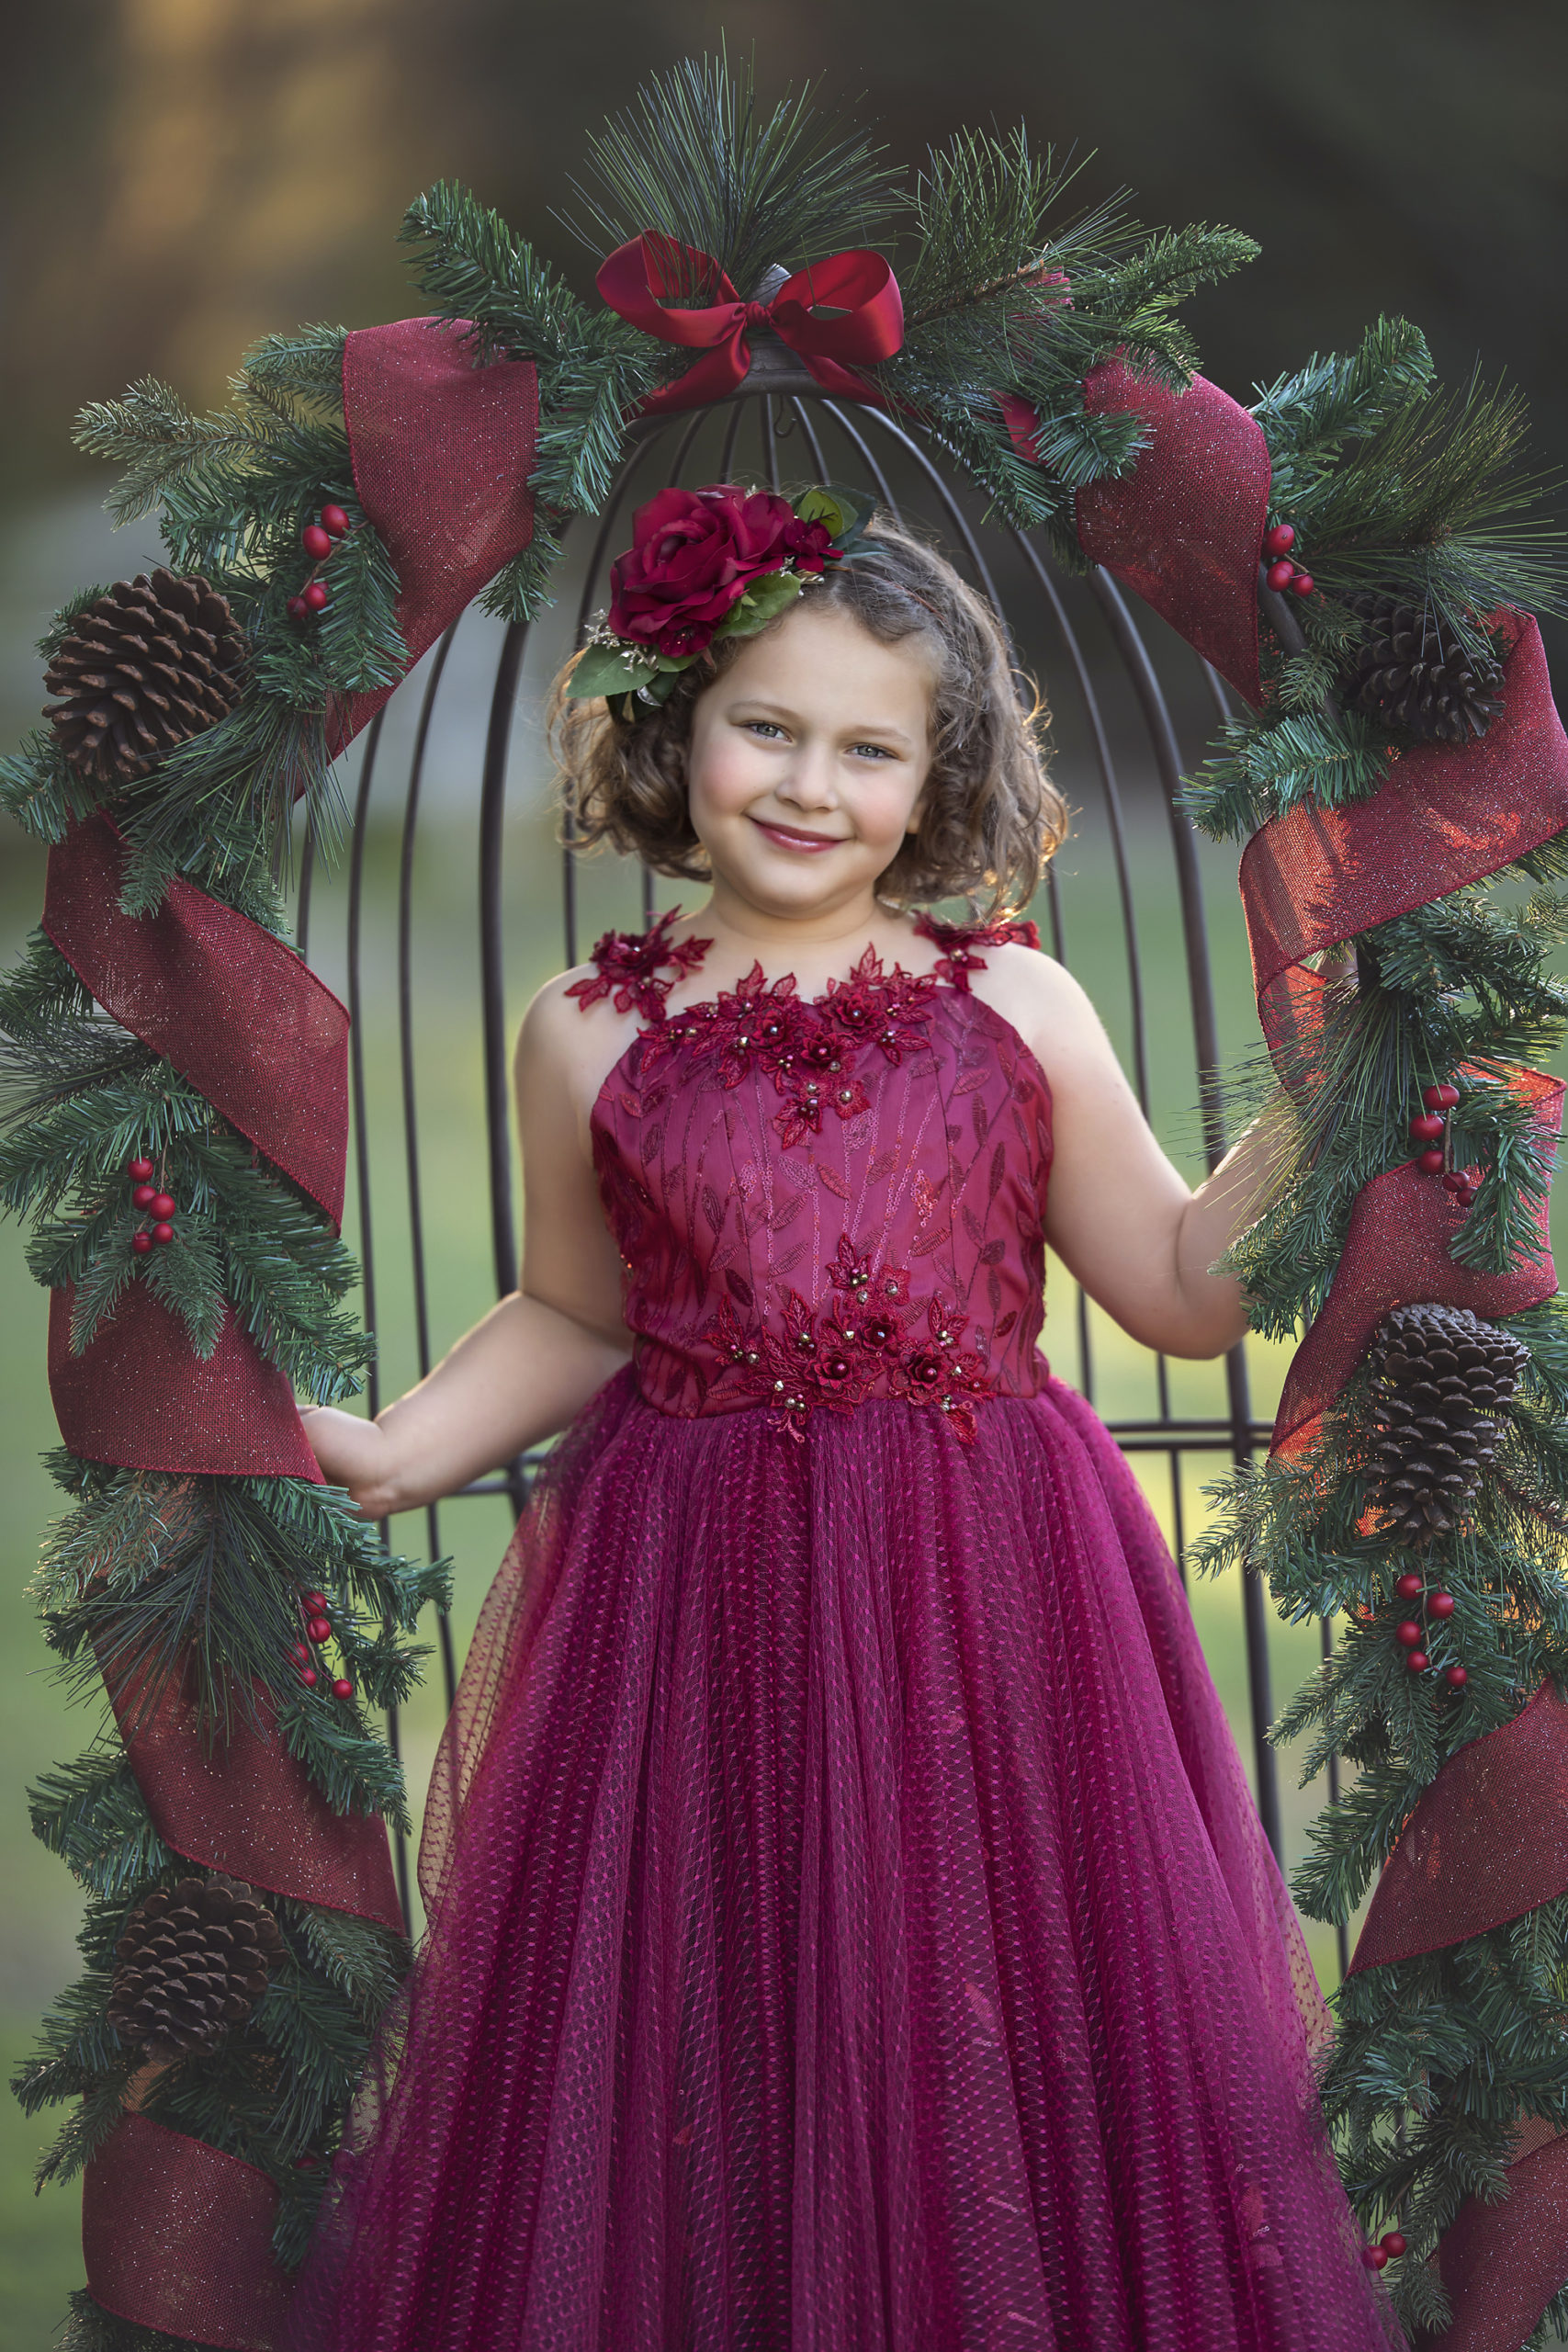 Girl in red dress under Christmas garland